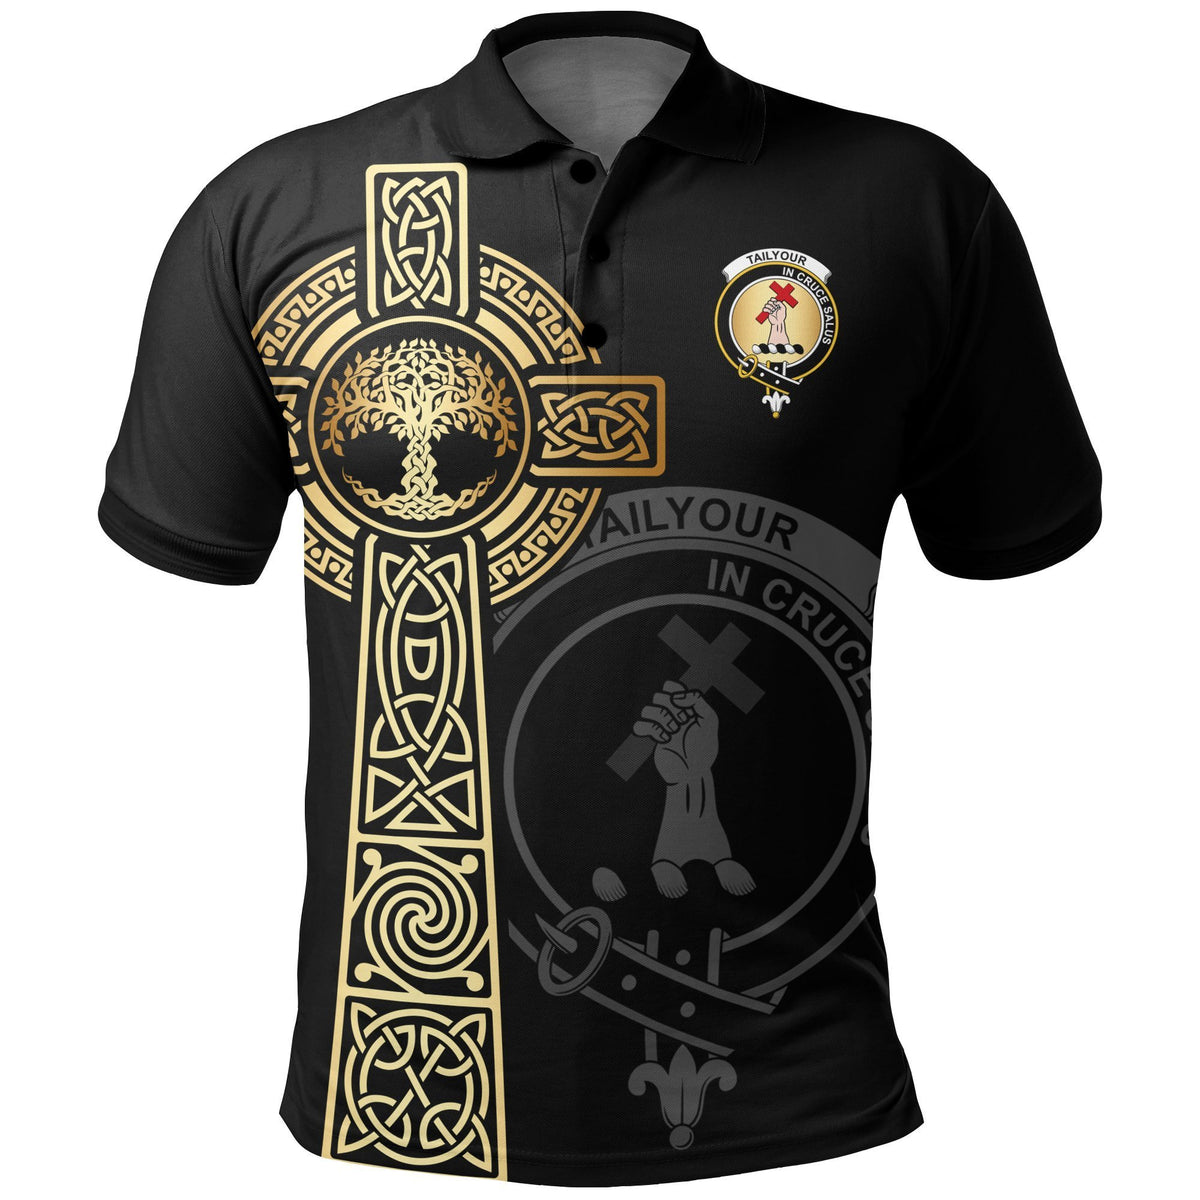 Tailyour (or Taylor) Clan Unisex Polo Shirt - Celtic Tree Of Life